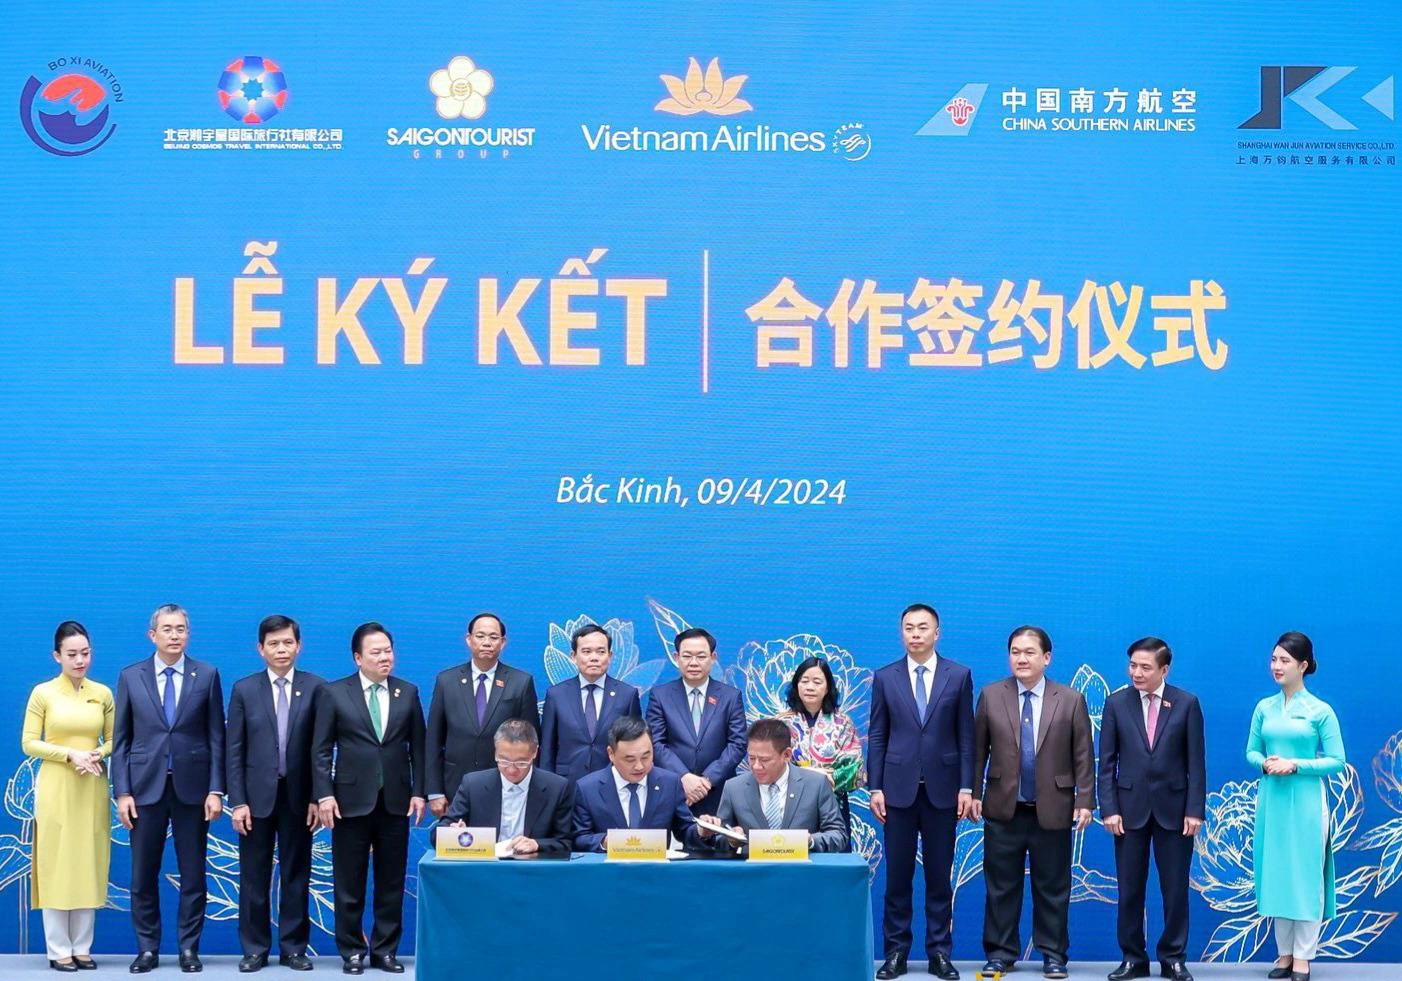 Vietnam Airlines, Saigontourist Group, and Beijing Cosmo Travel International Company representatives sign a memorandum of understanding related to tourism in Beijing, China, April 9, 2024. Photo: Supplied